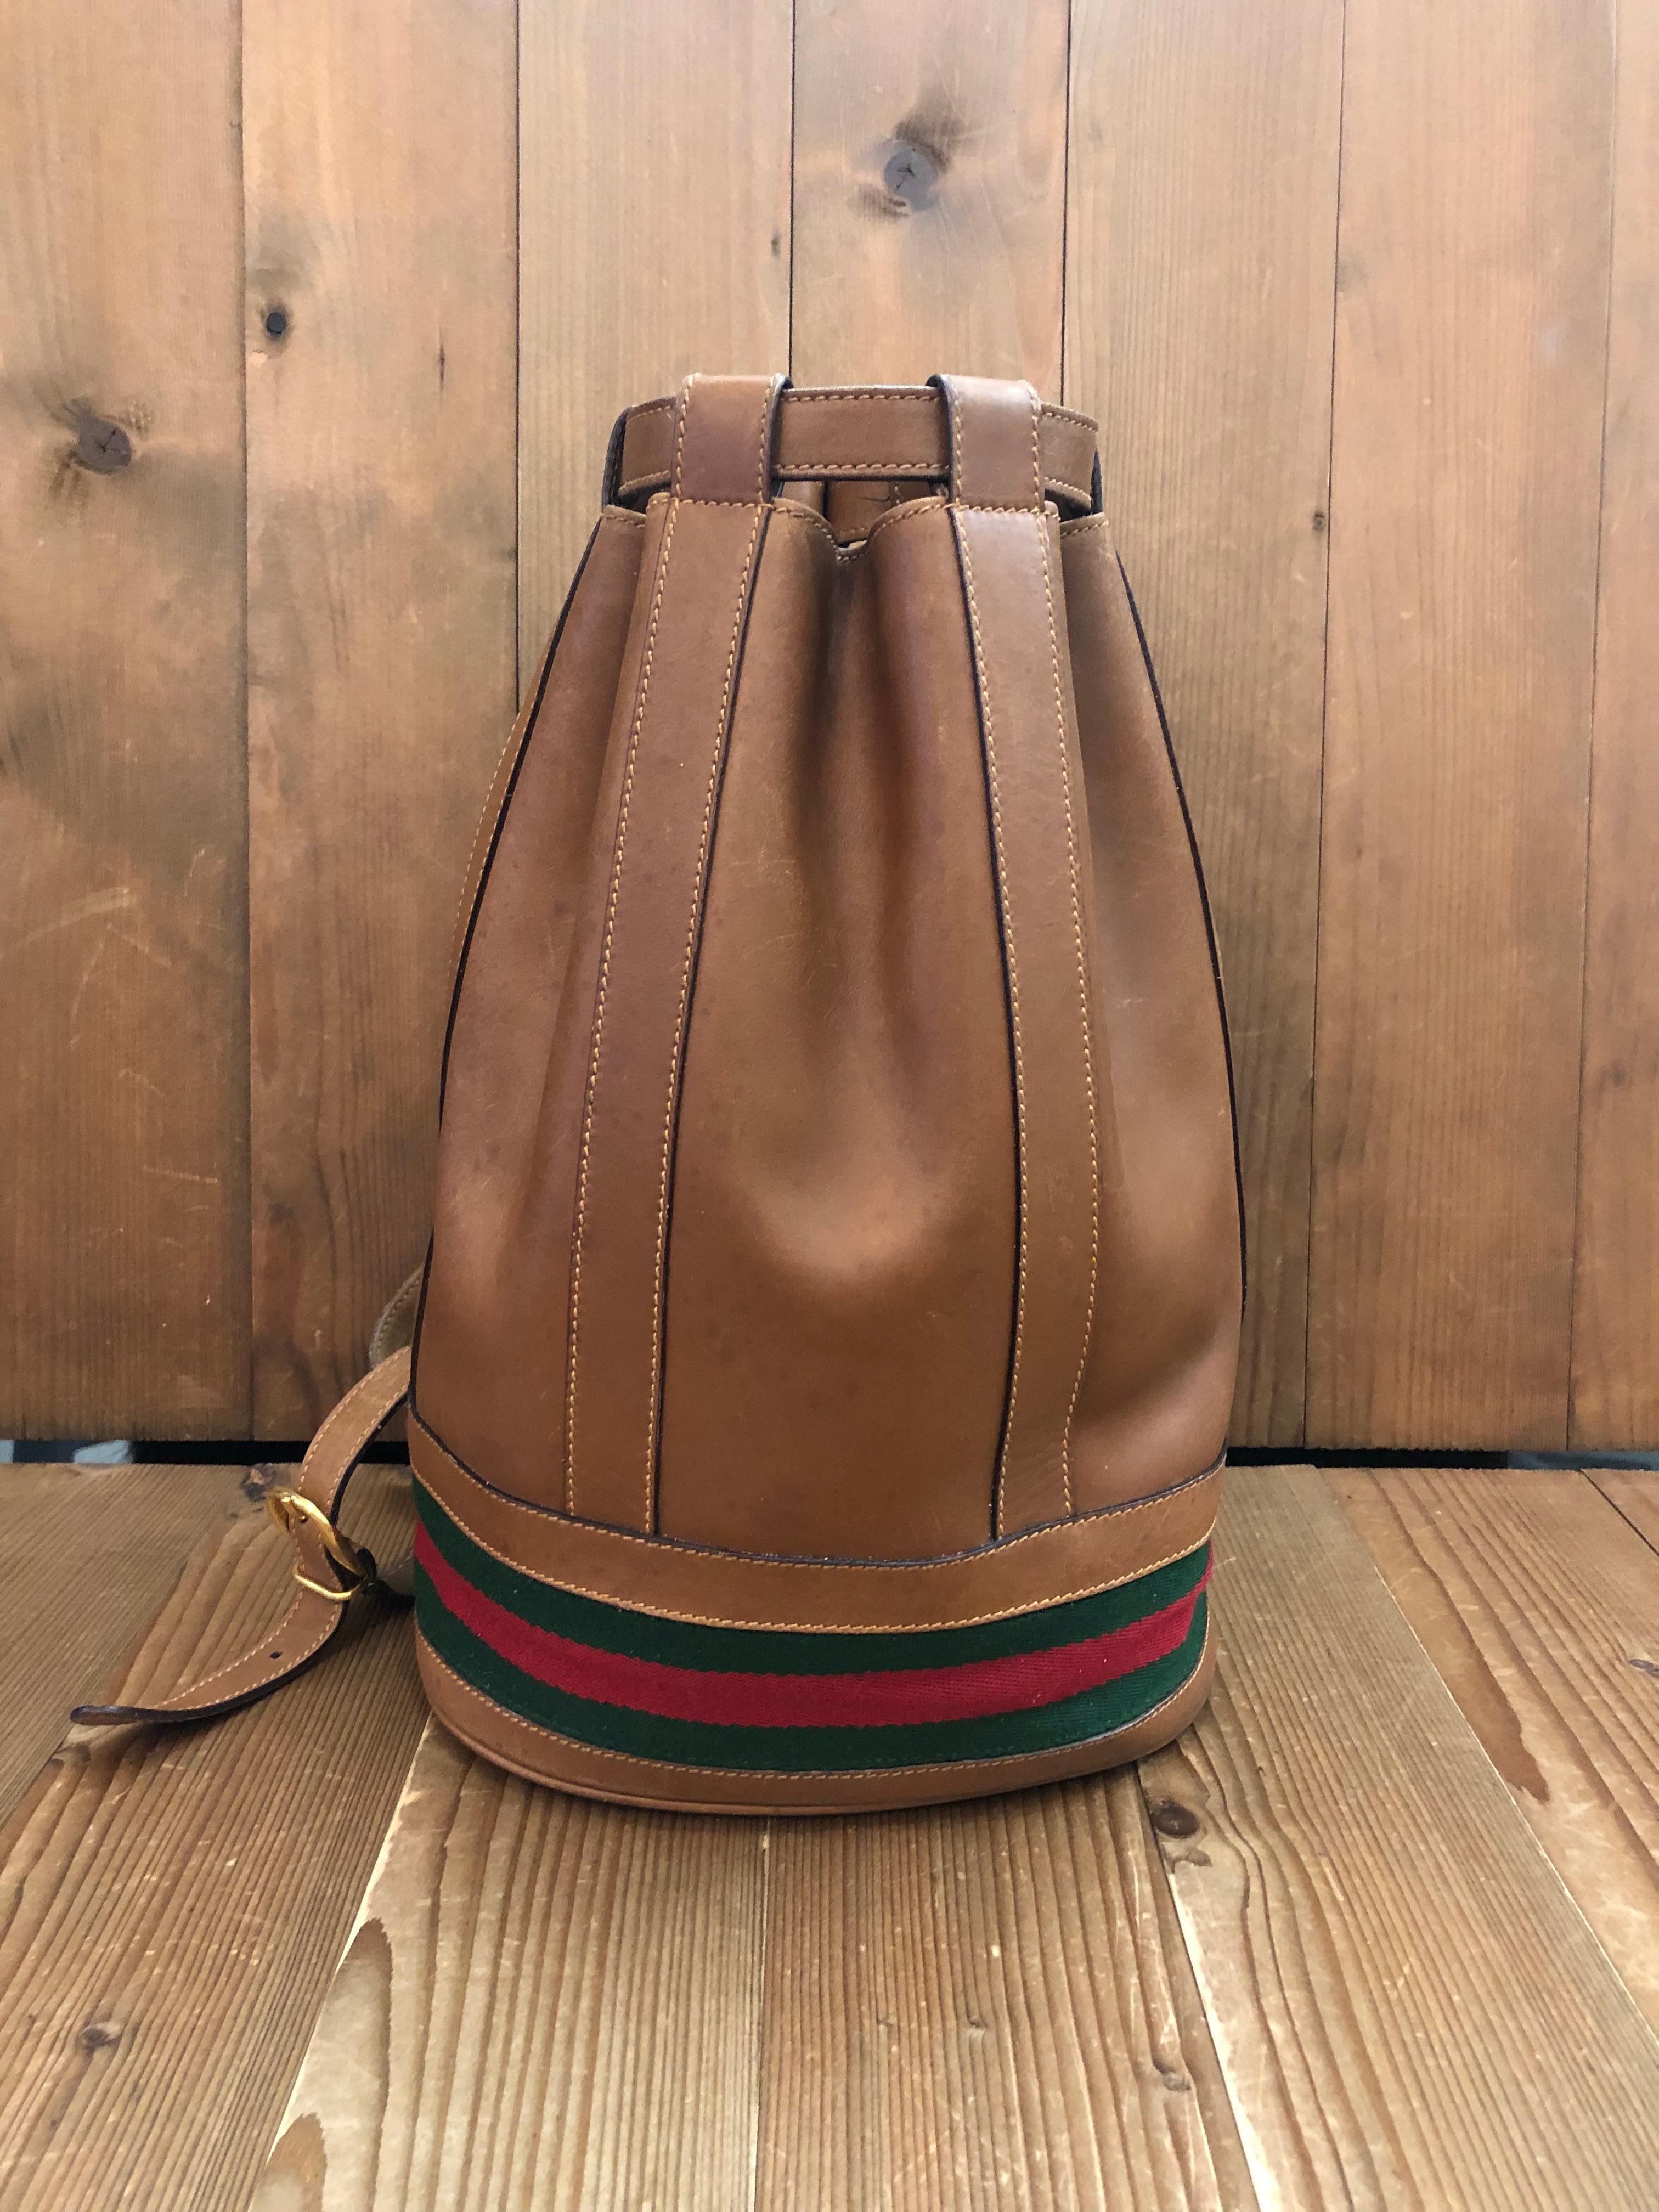 This vintage GUCCI Web bucket shoulder bag is crafted of smooth calfskin leather in tan featuring gold toned hardware and decorated with Gucci’s iconic red/green stripe around the bottom. Top drawstring closure opens to a new coated interior in